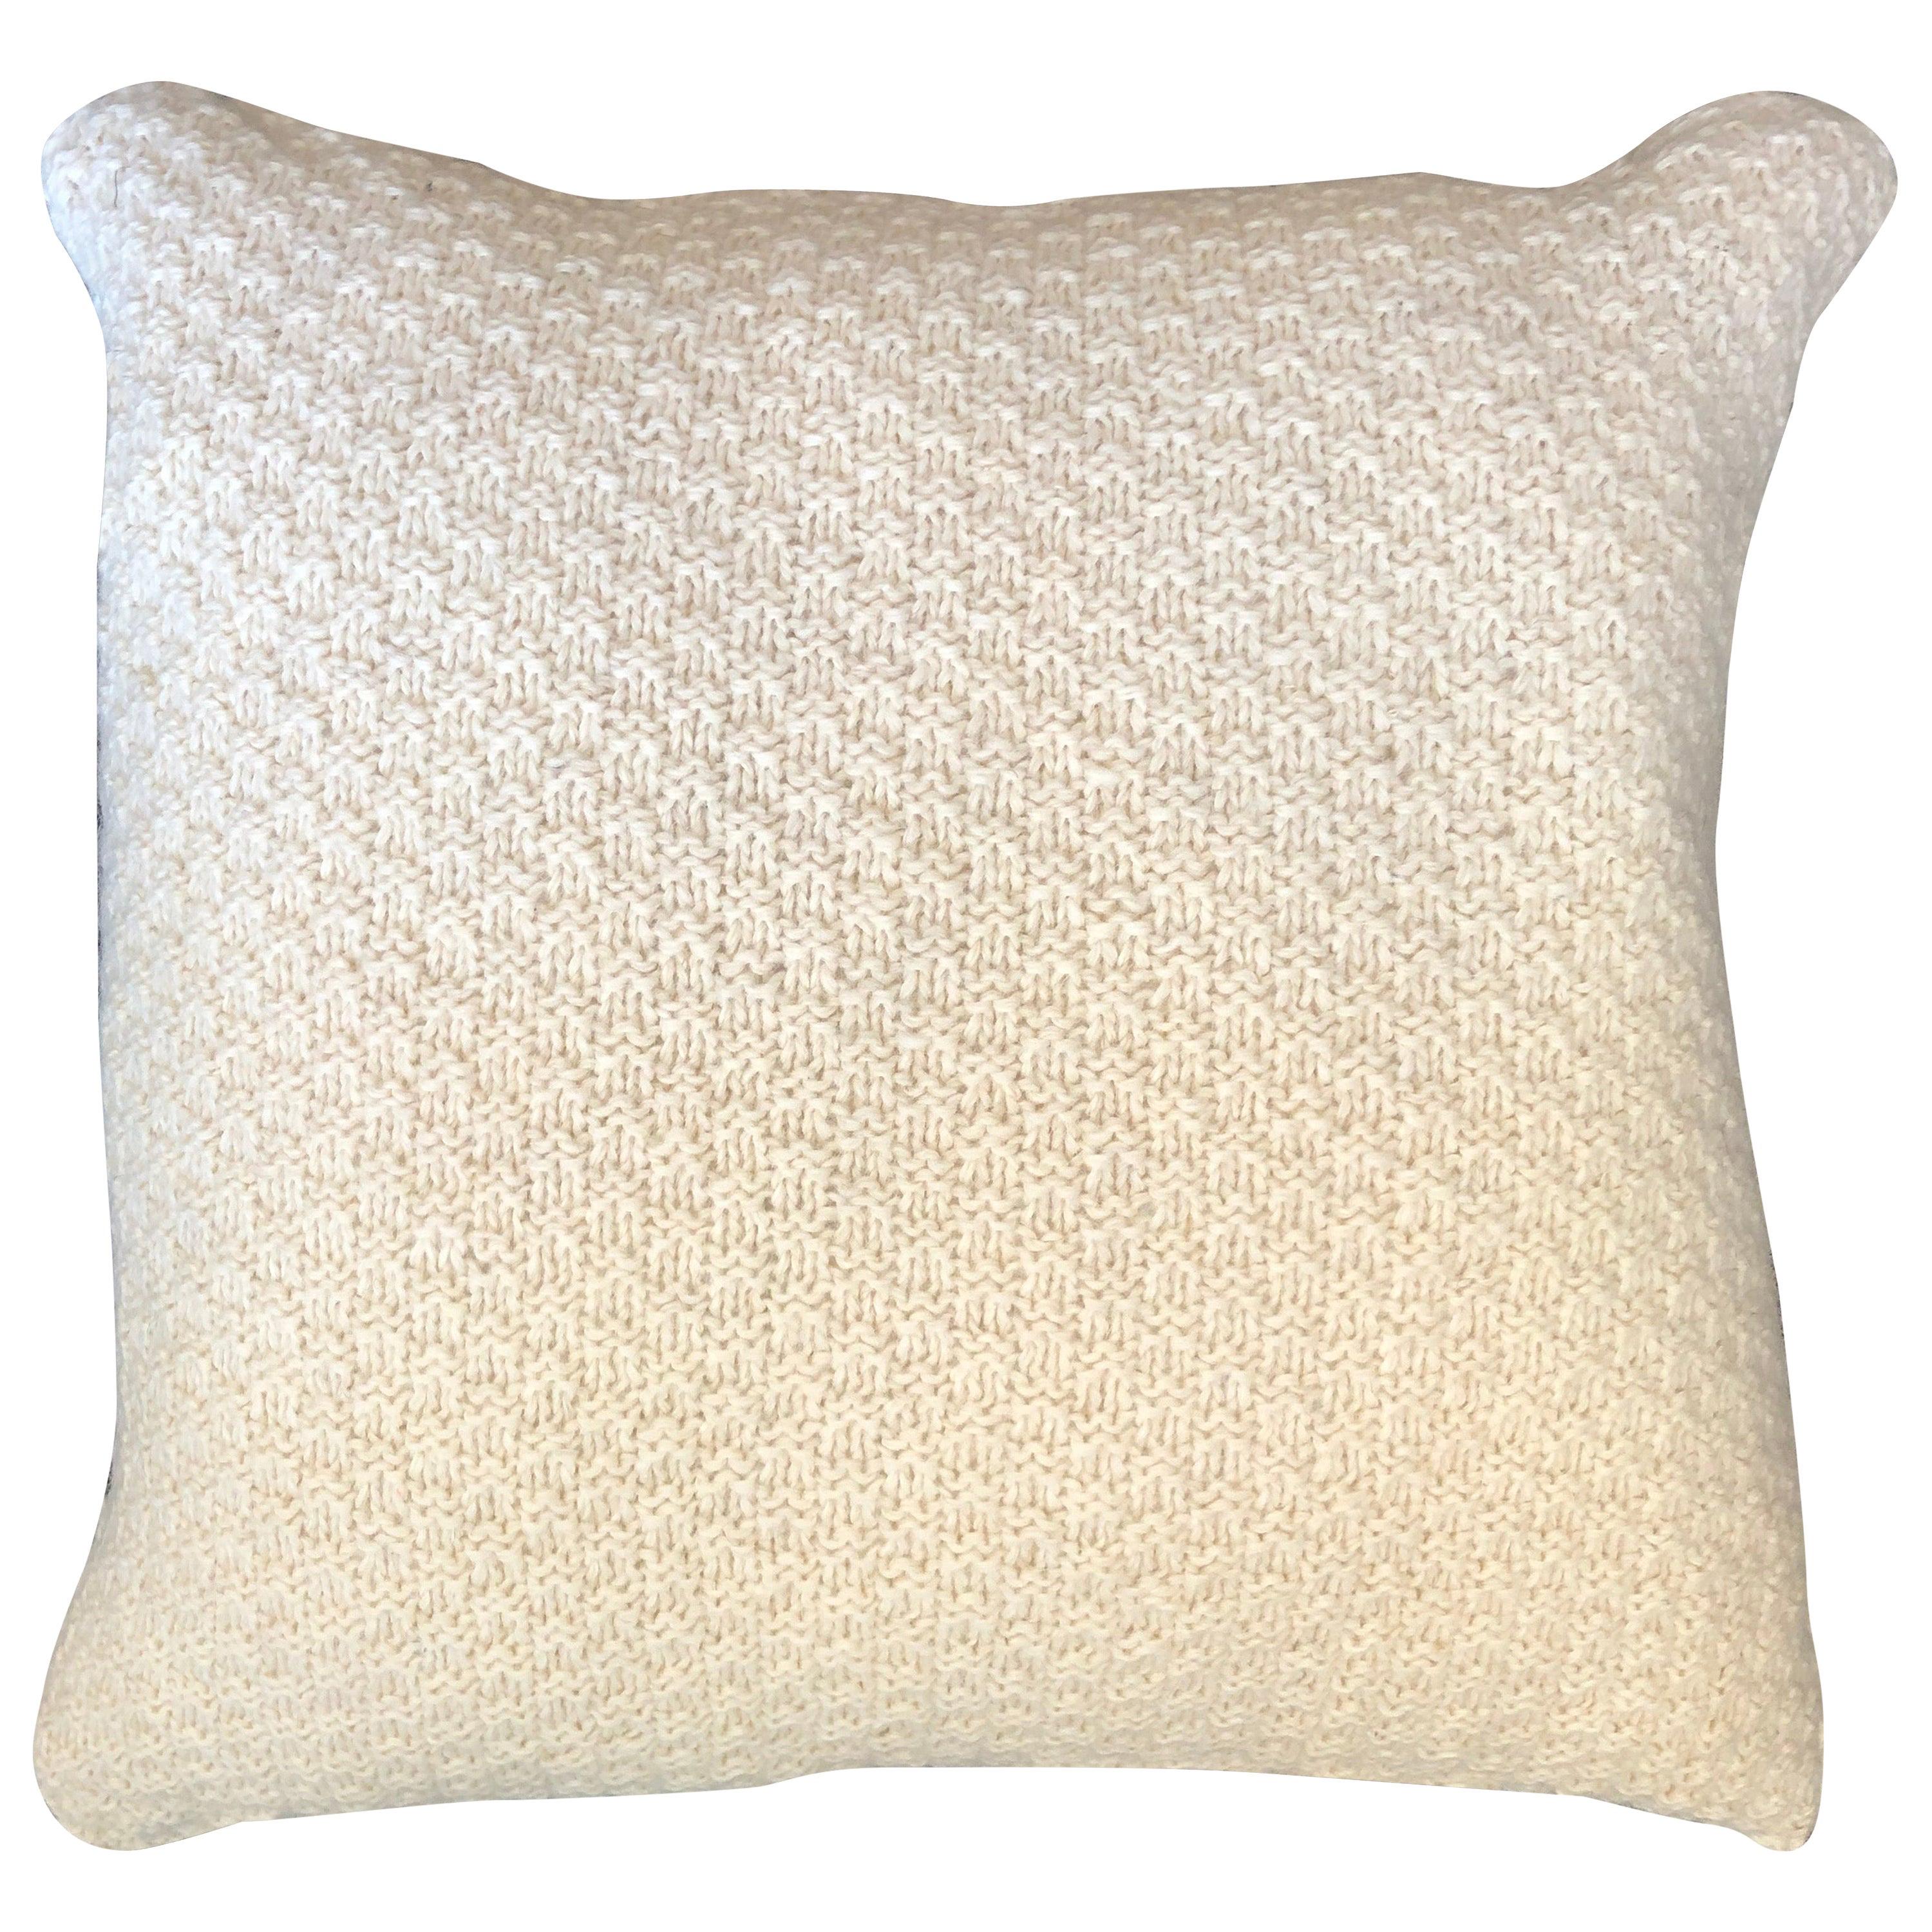 "Ostia" Handmade Wool Off-White Pillow by Le Lampade For Sale